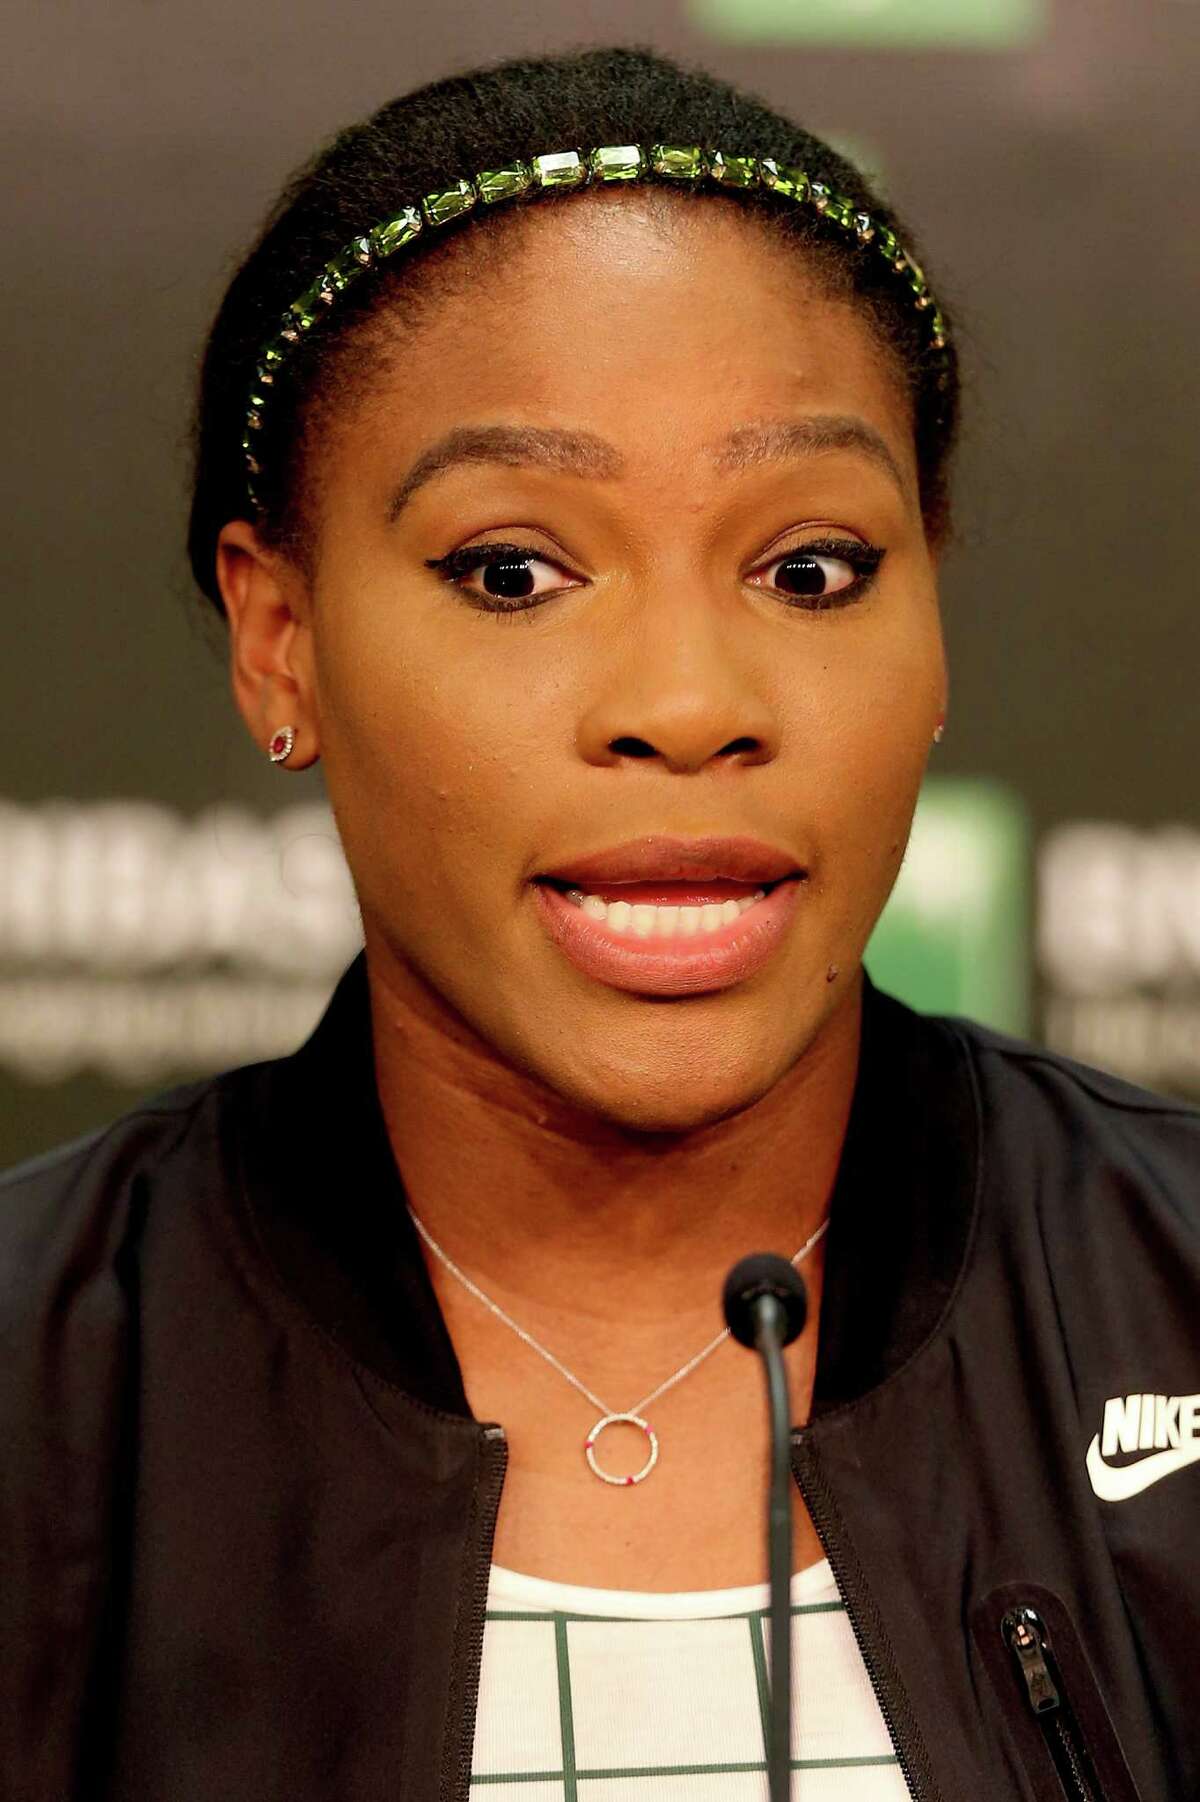 INDIAN WELLS, CA - MARCH 12: Serena Williams addresses the media at a press conference during day four of the BNP Paribas Open at the Indian Wells Tennis Garden on March 12, 2015 in Indian Wells, California. (Photo by Matthew Stockman/Getty Images) ORG XMIT: 538629395